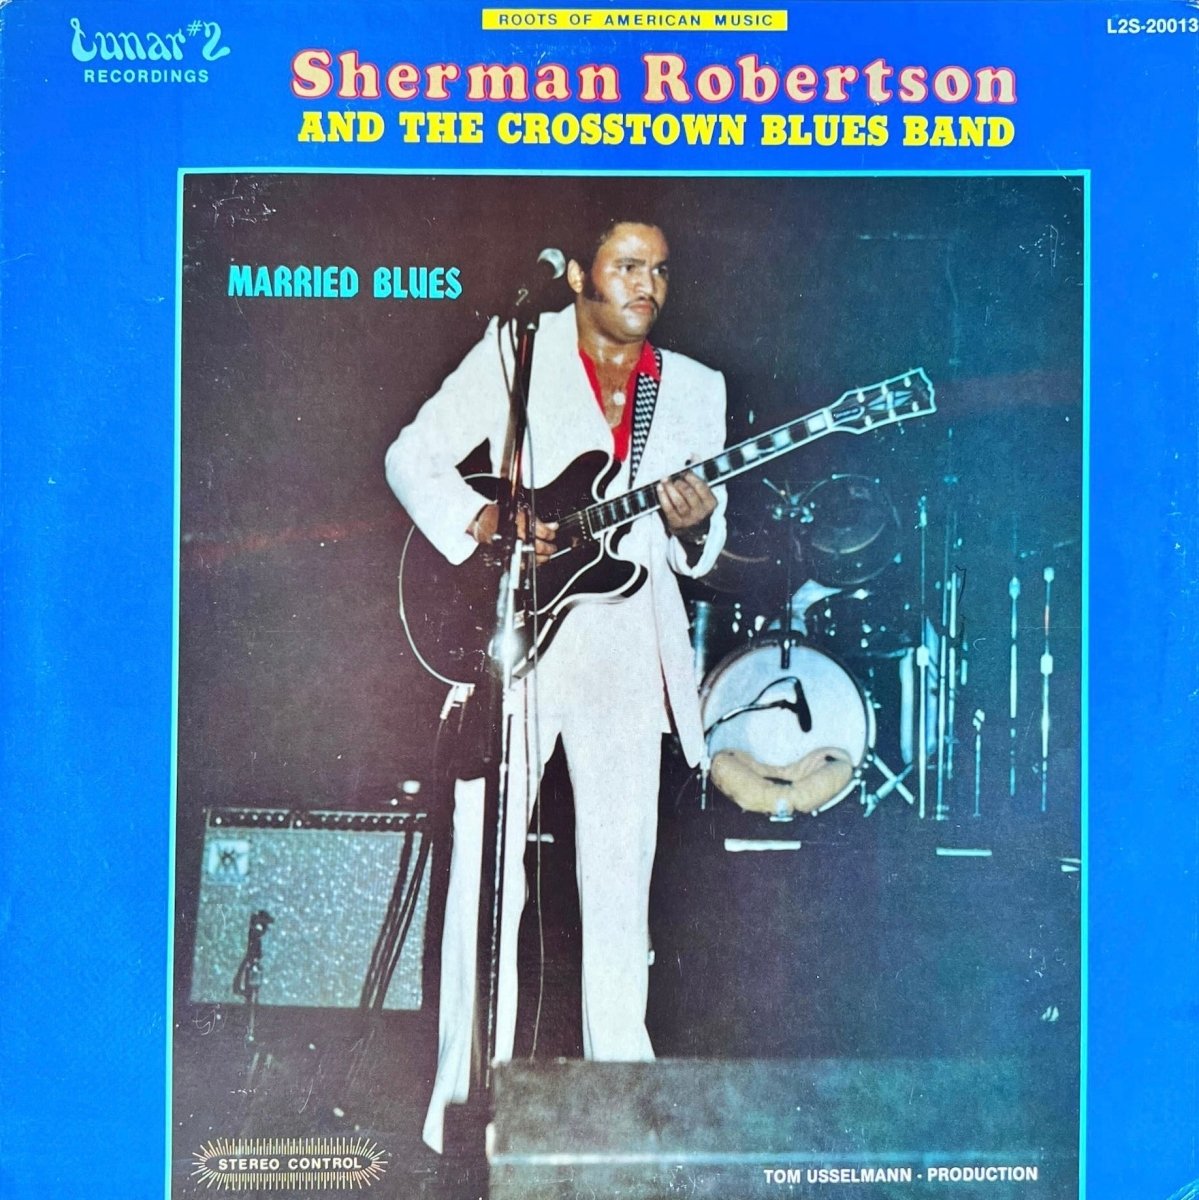 Sherman Robertson And The Crosstown Blues Band - Married Blues Vinyl